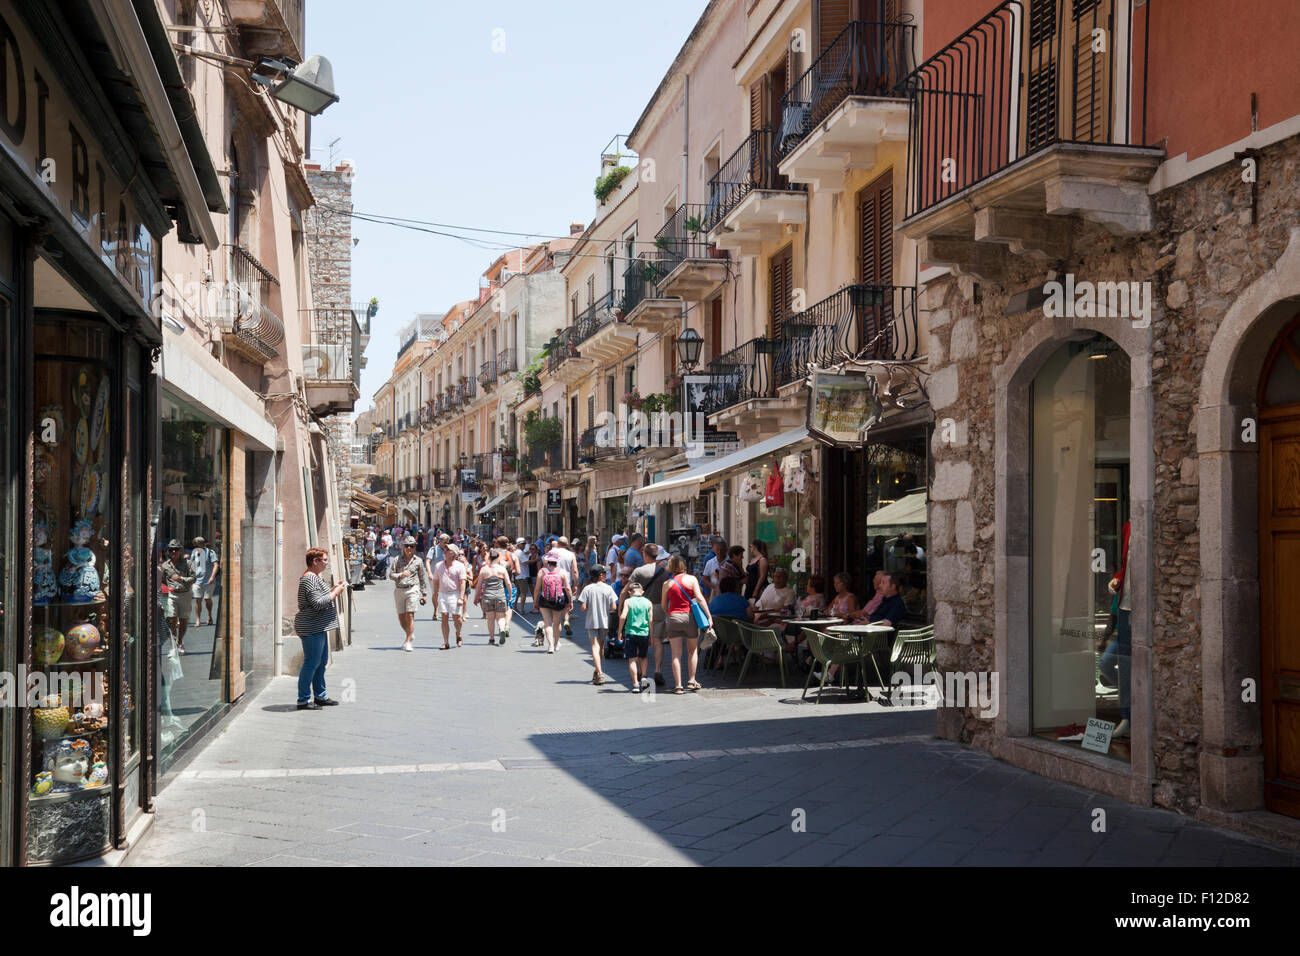 Corso Umberto I the main street in Taormina Old Town, Sicily, Italy filled with tourists Stock Photo